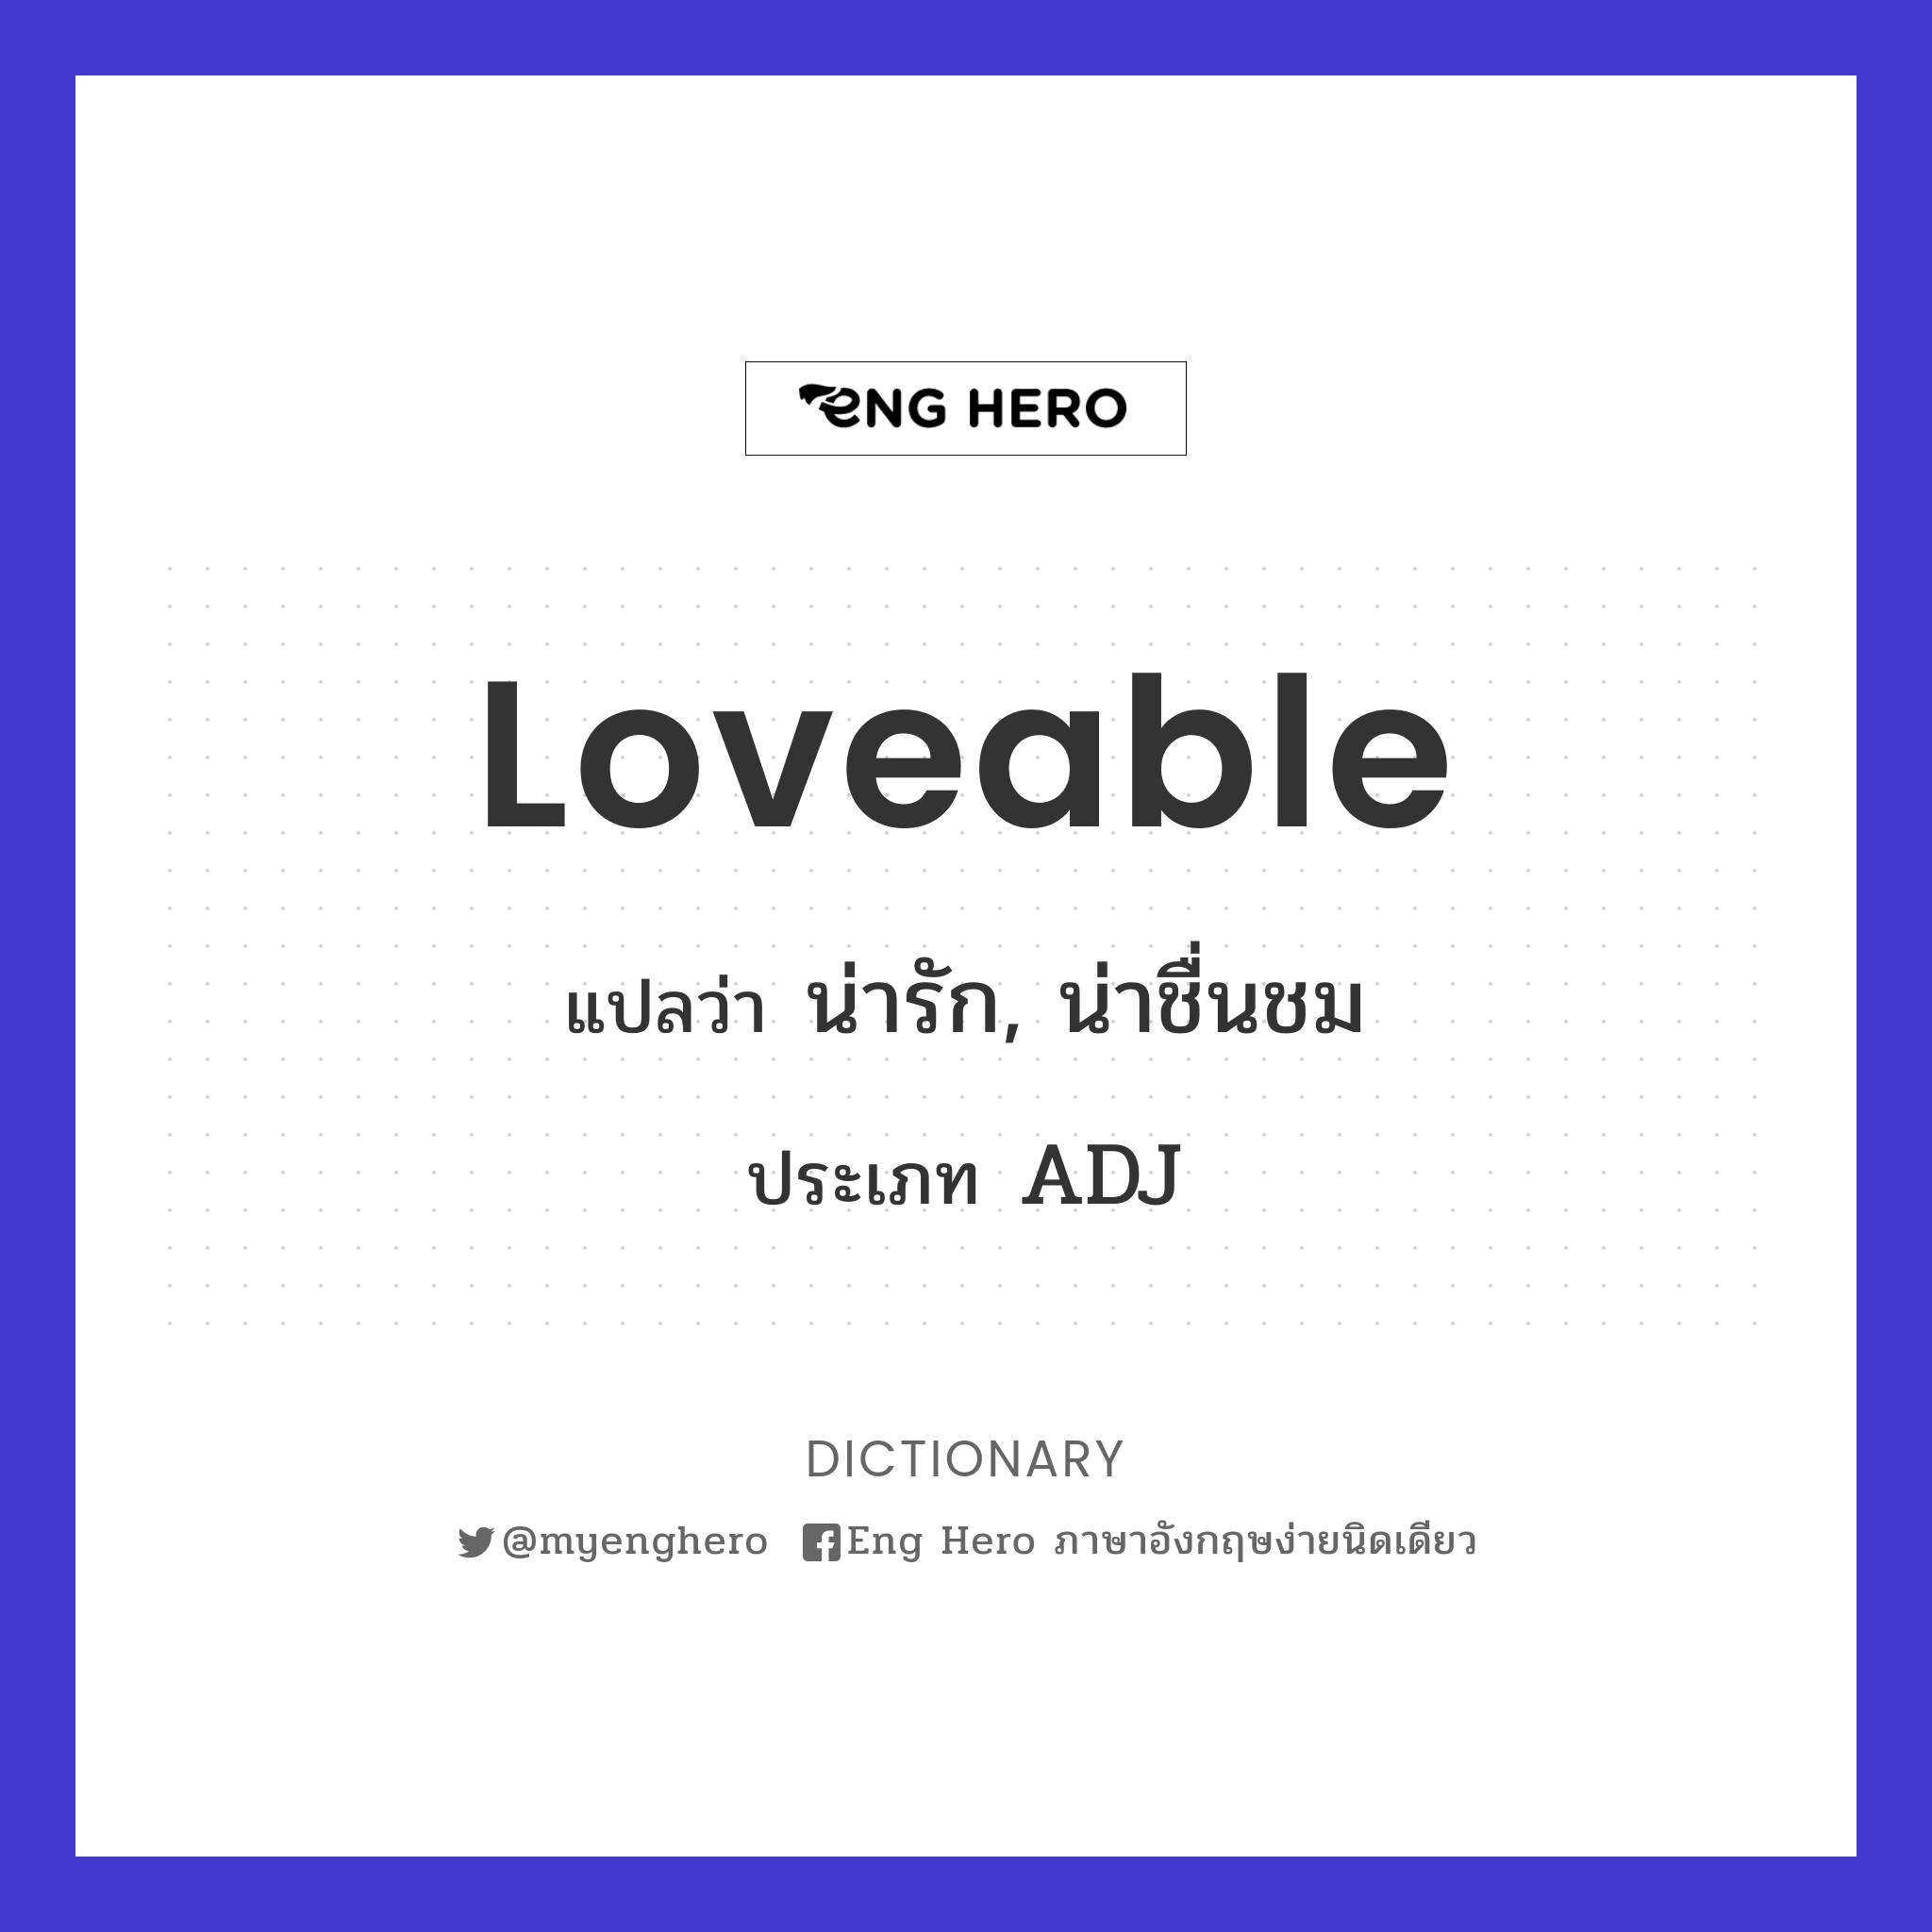 loveable